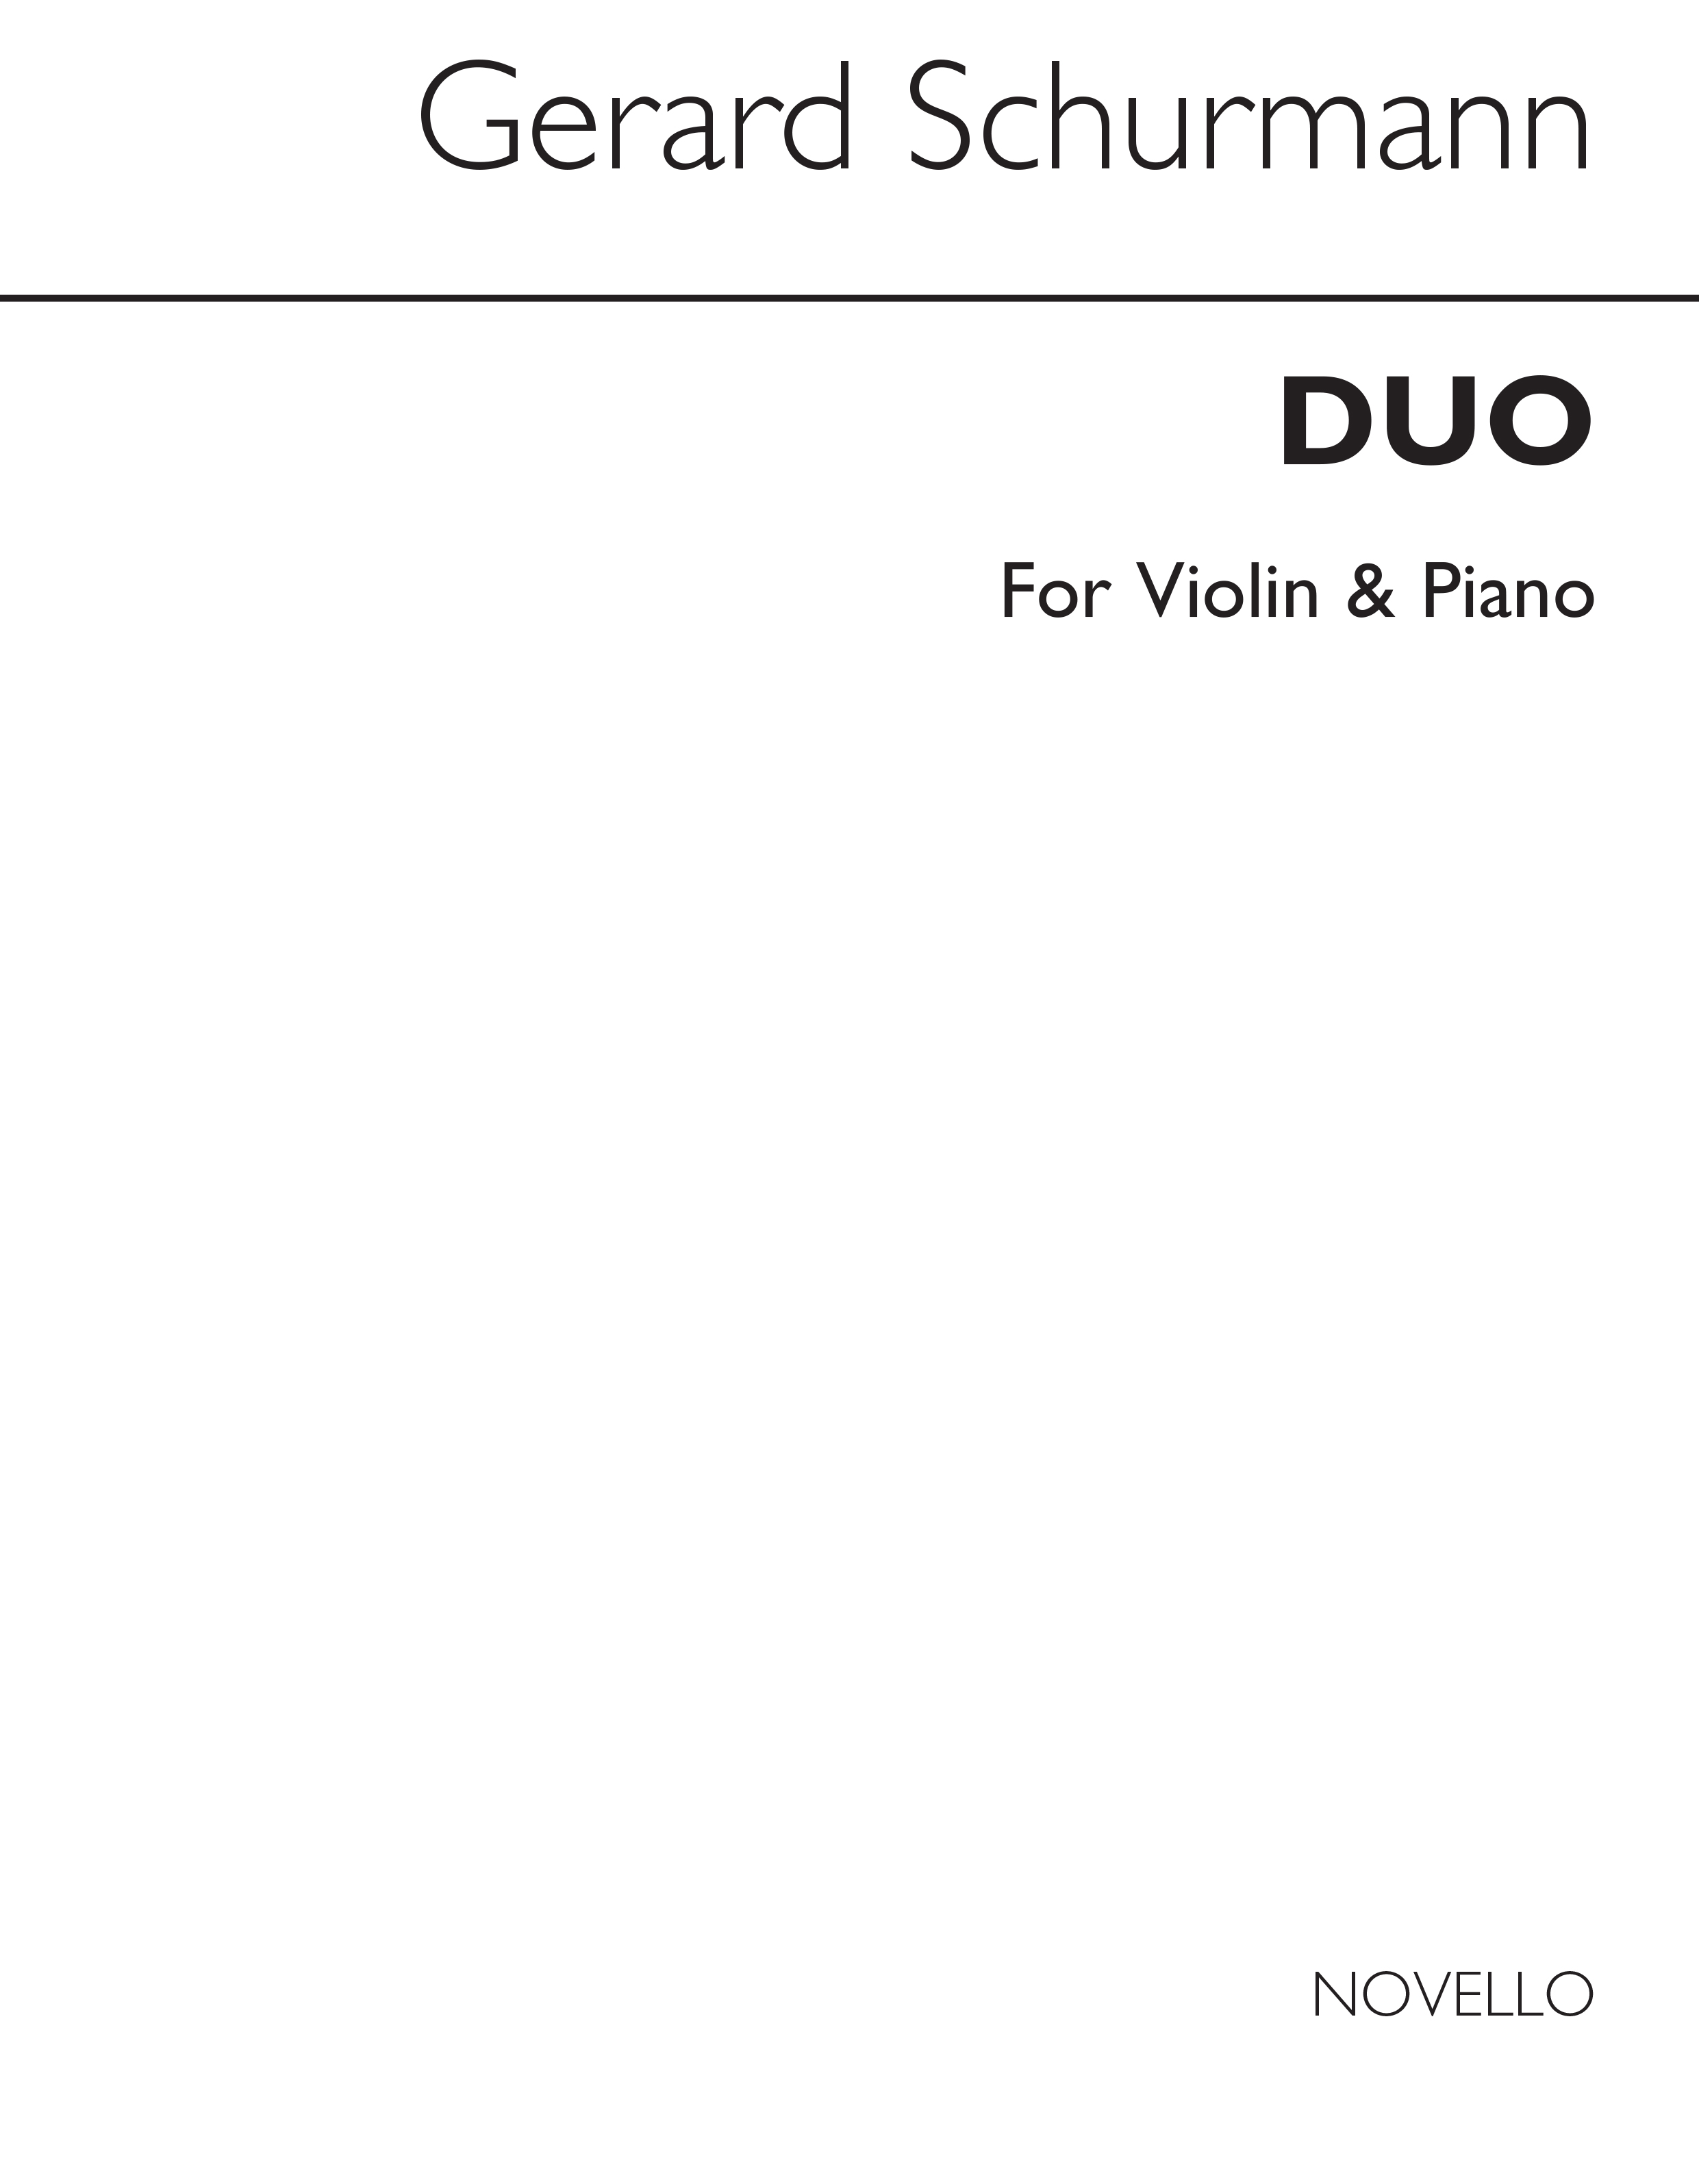 Schurmann: Duo For Violin And Piano